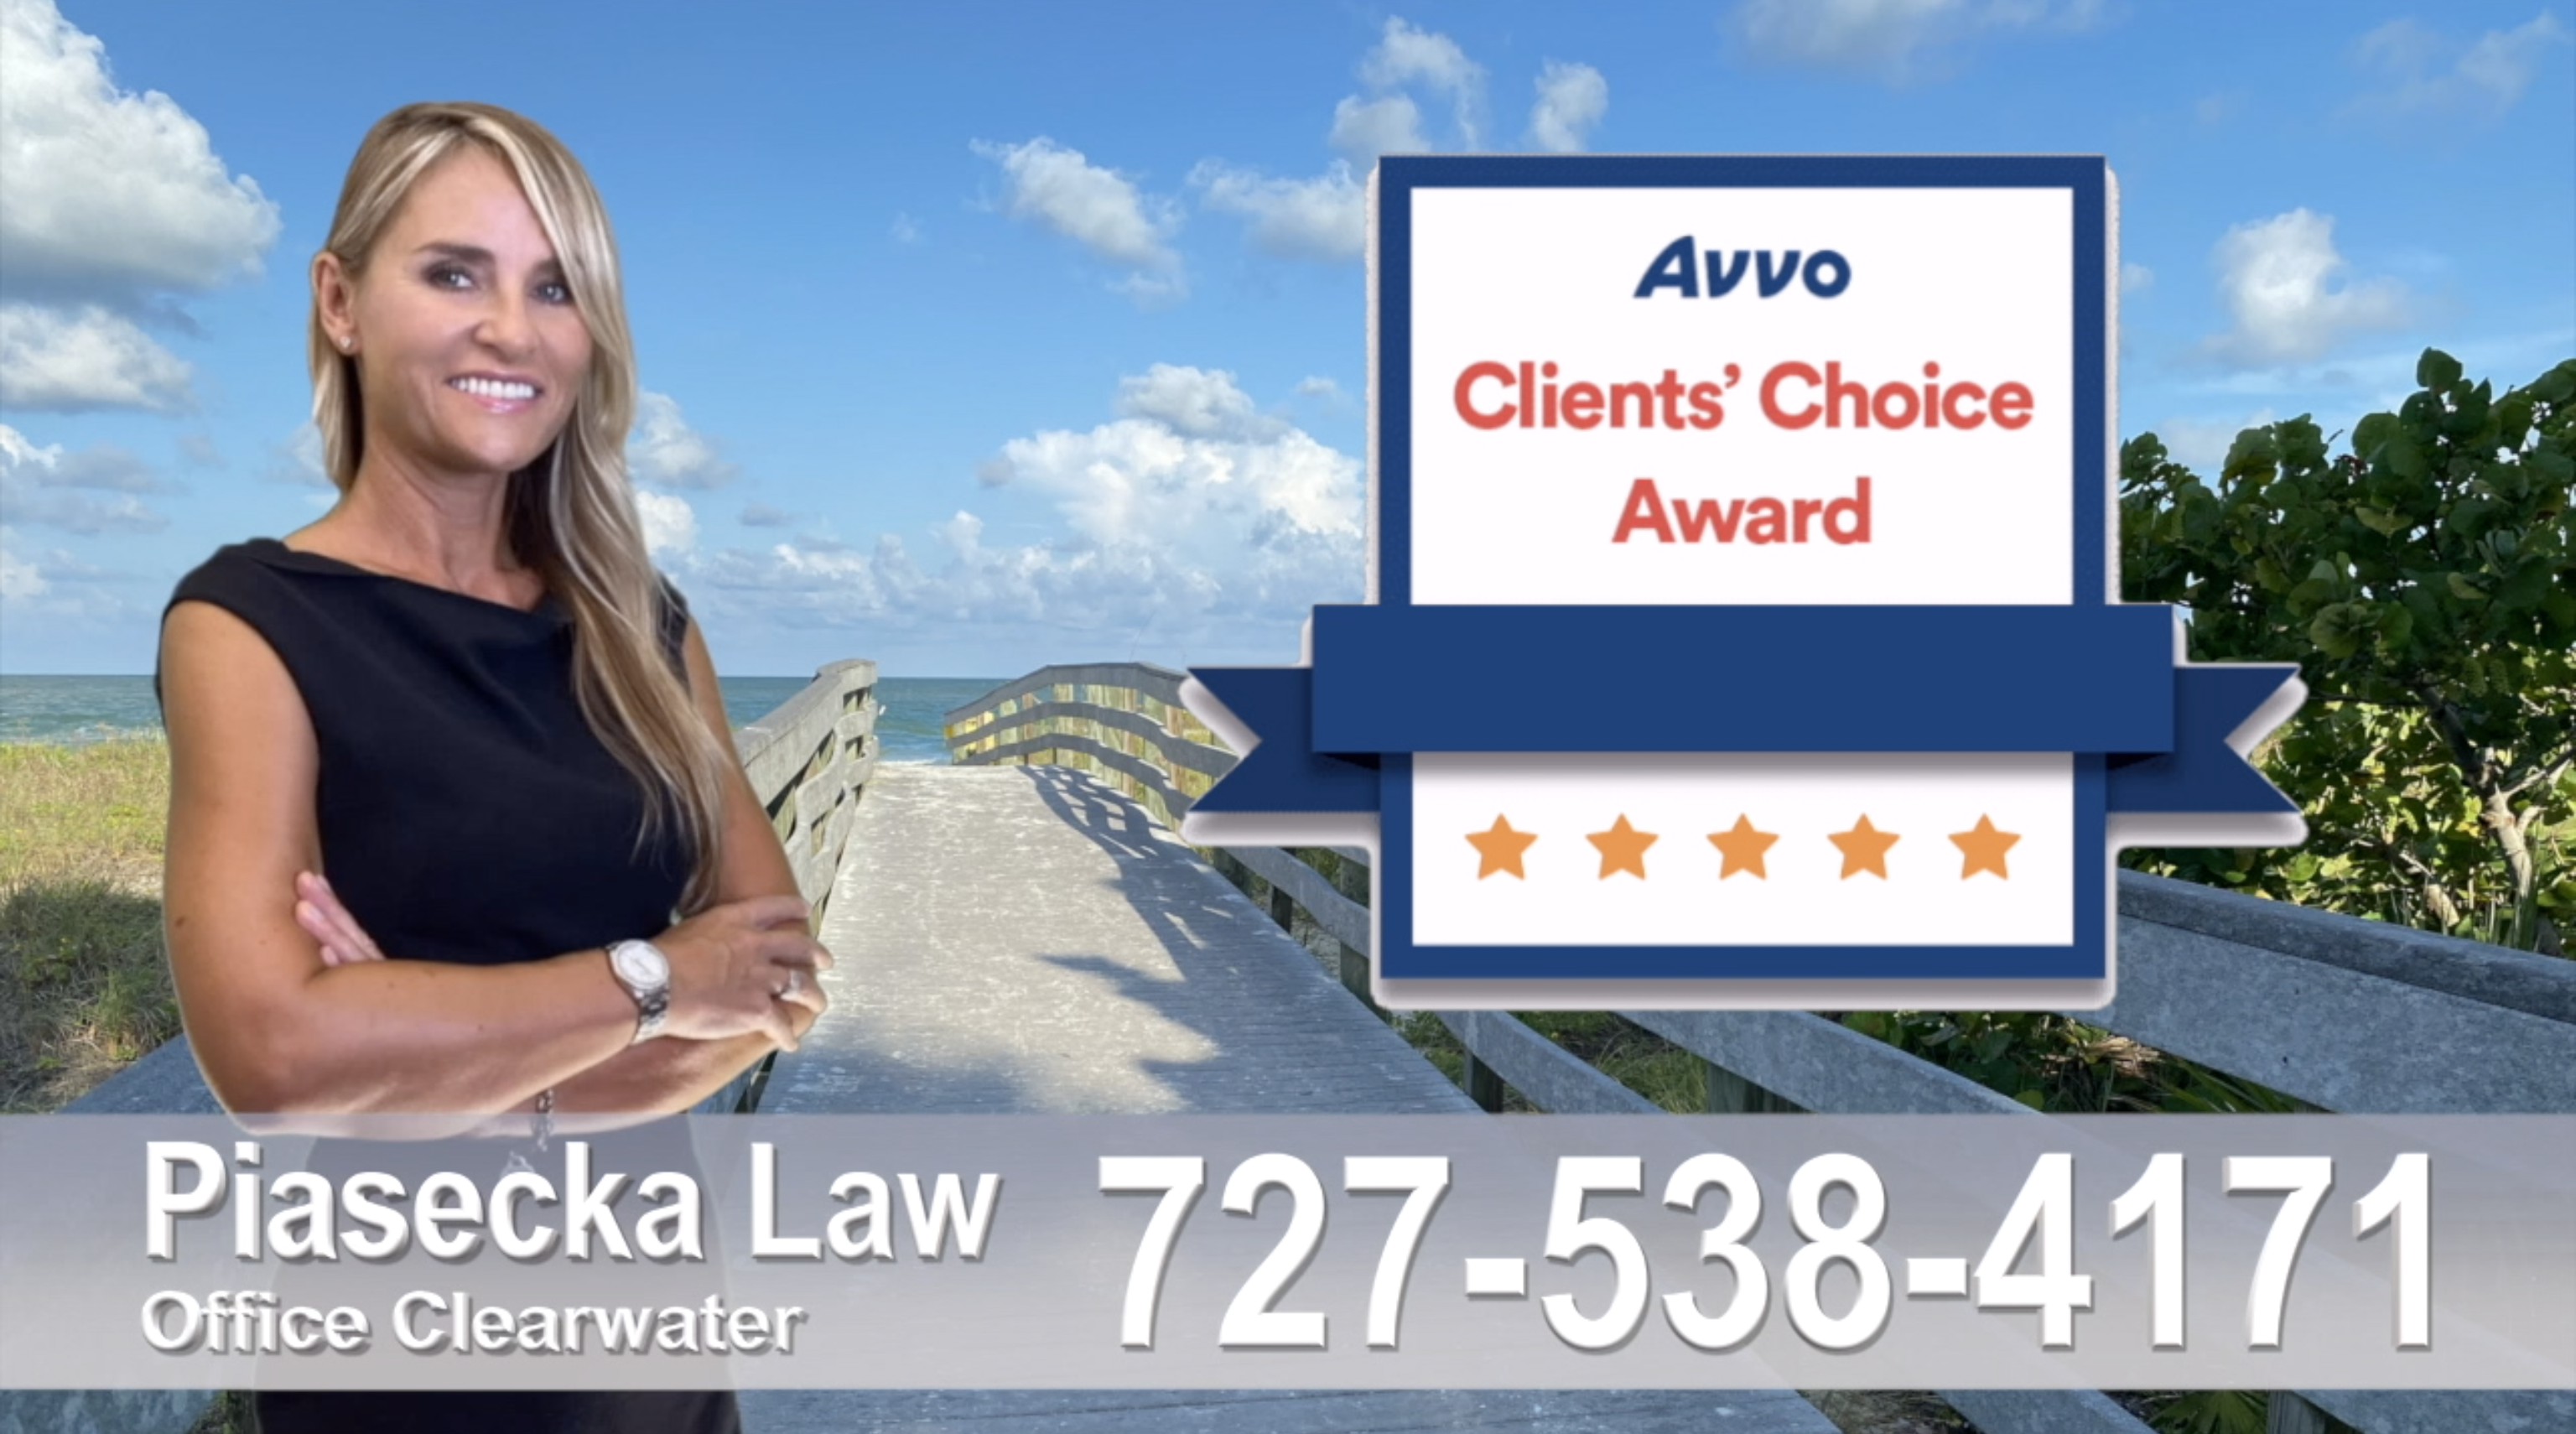 Jacksonville Polish, attorney, polish, lawyer, clients, reviews, client's, avvo, award